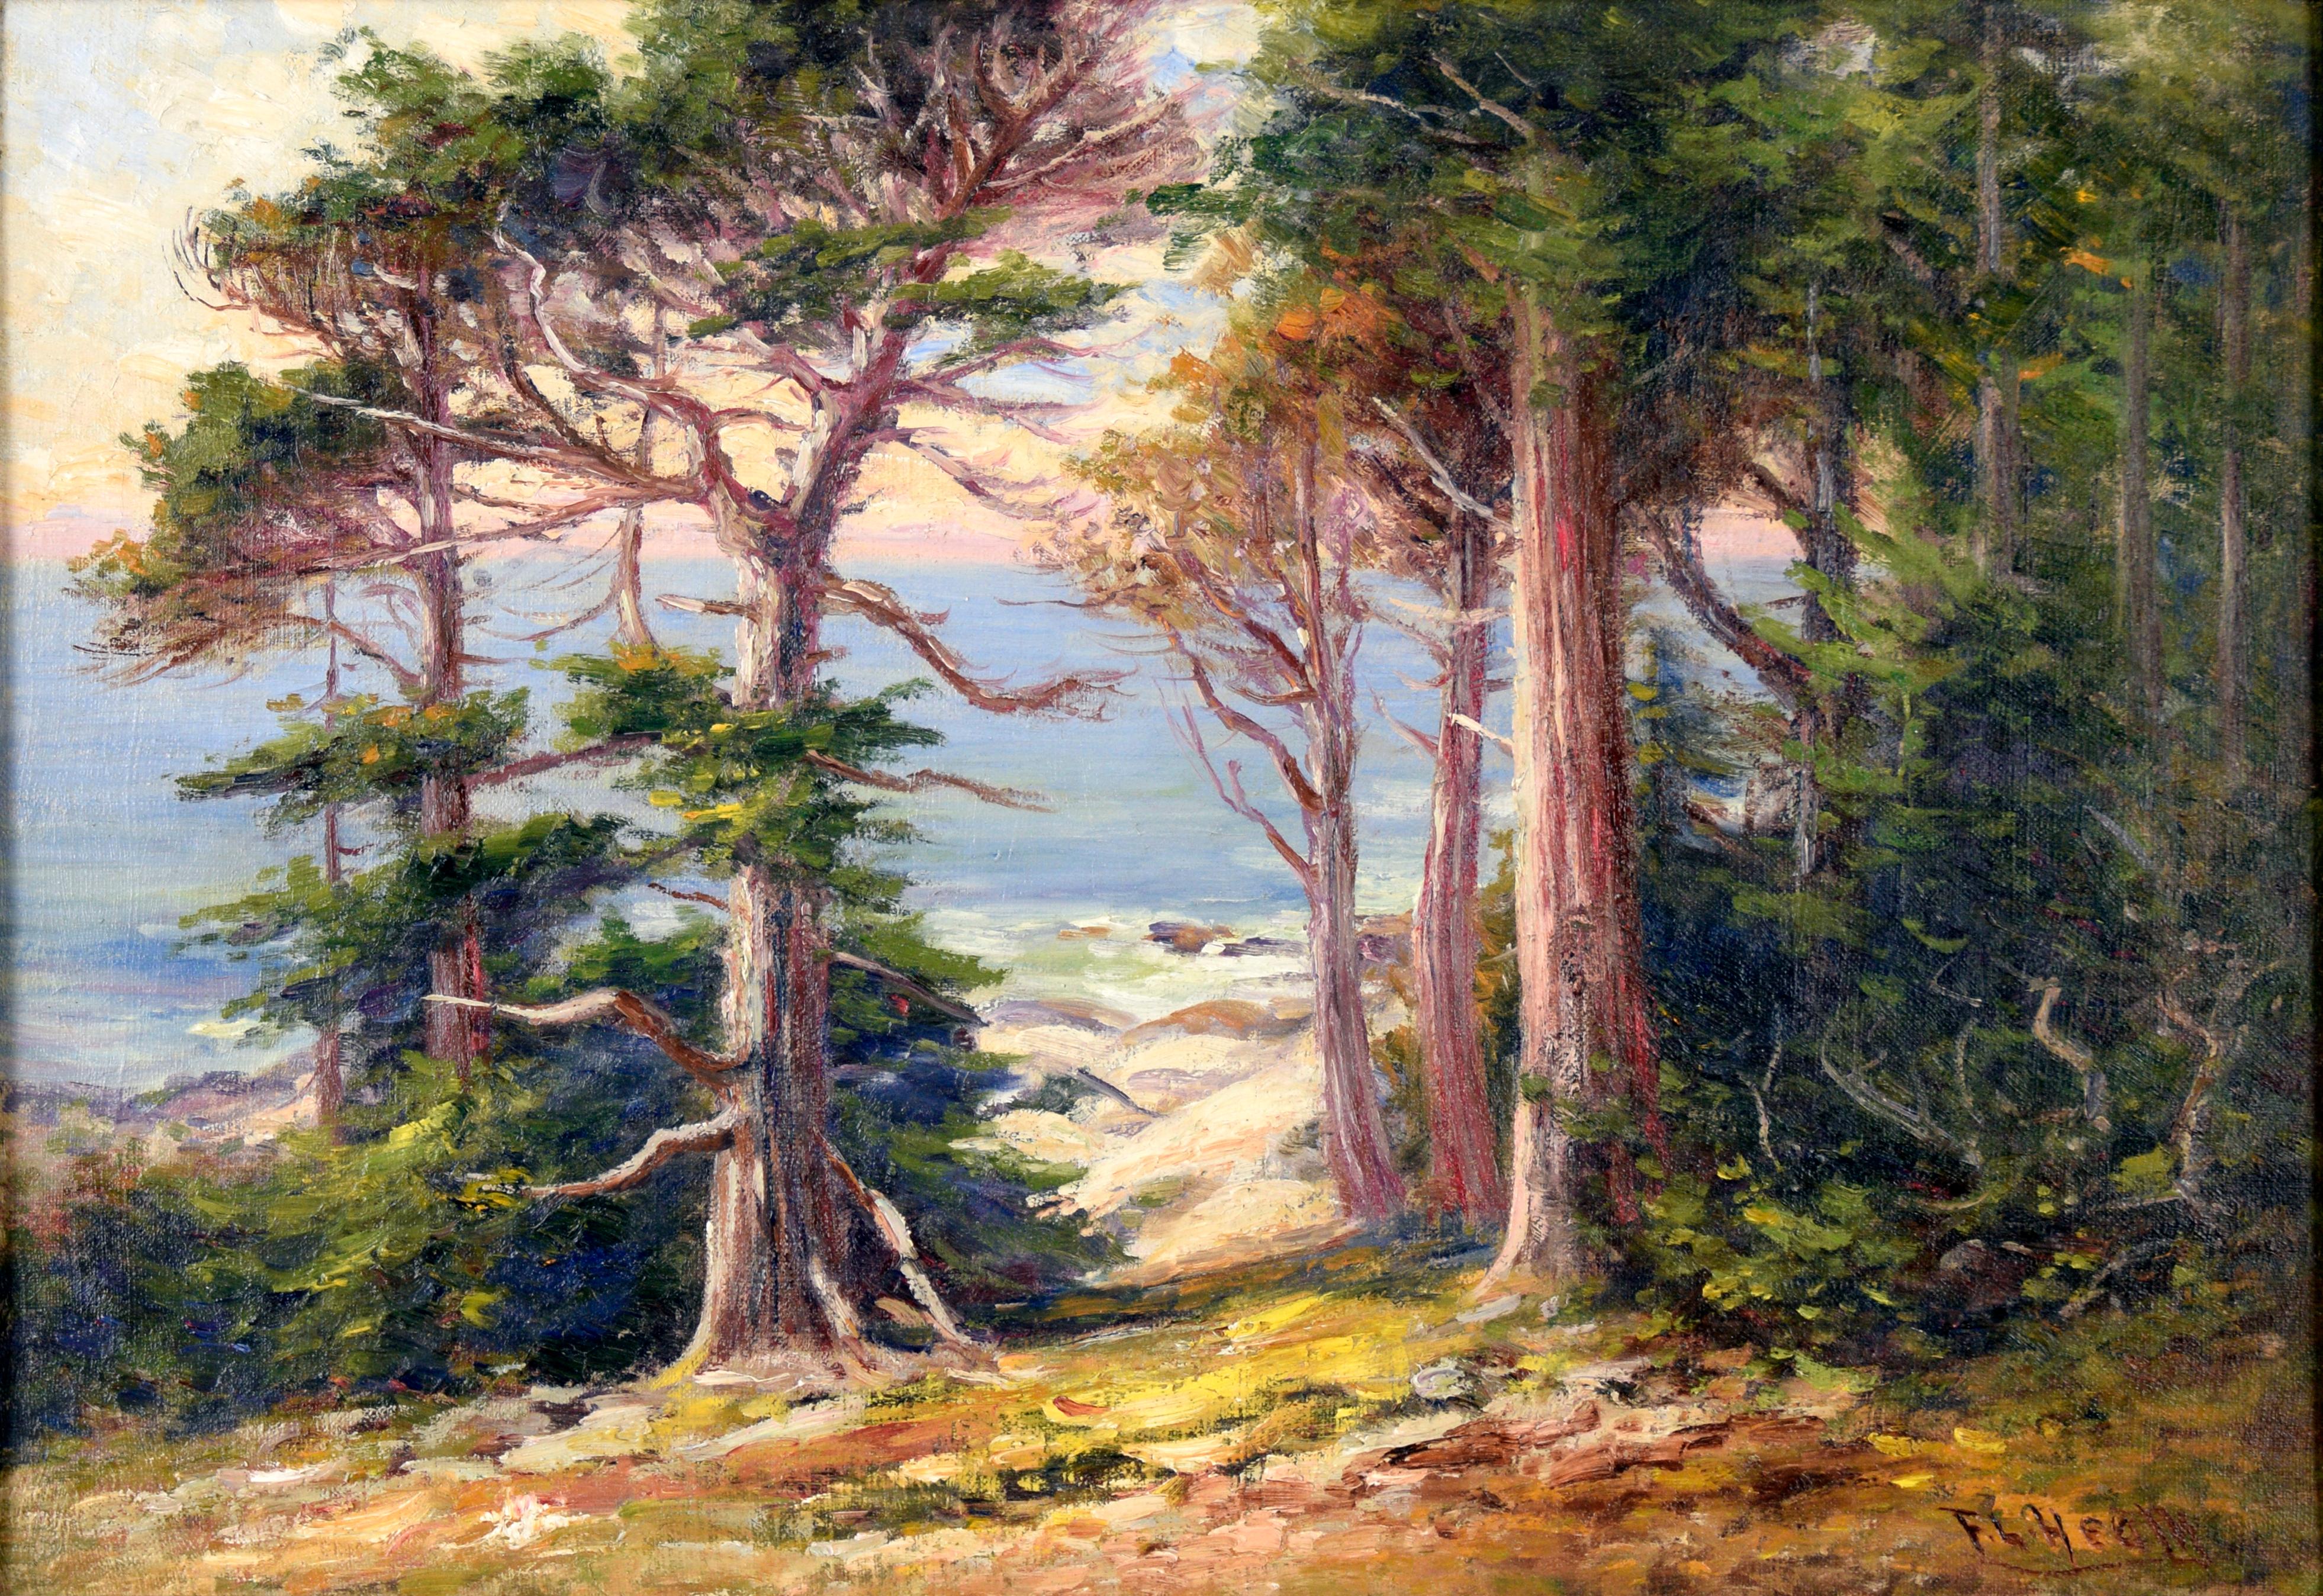 Old 17 Mile Drive, Carmel California Landscape Early 1900s Oil on Linen - Painting by Frank Lucien Heath